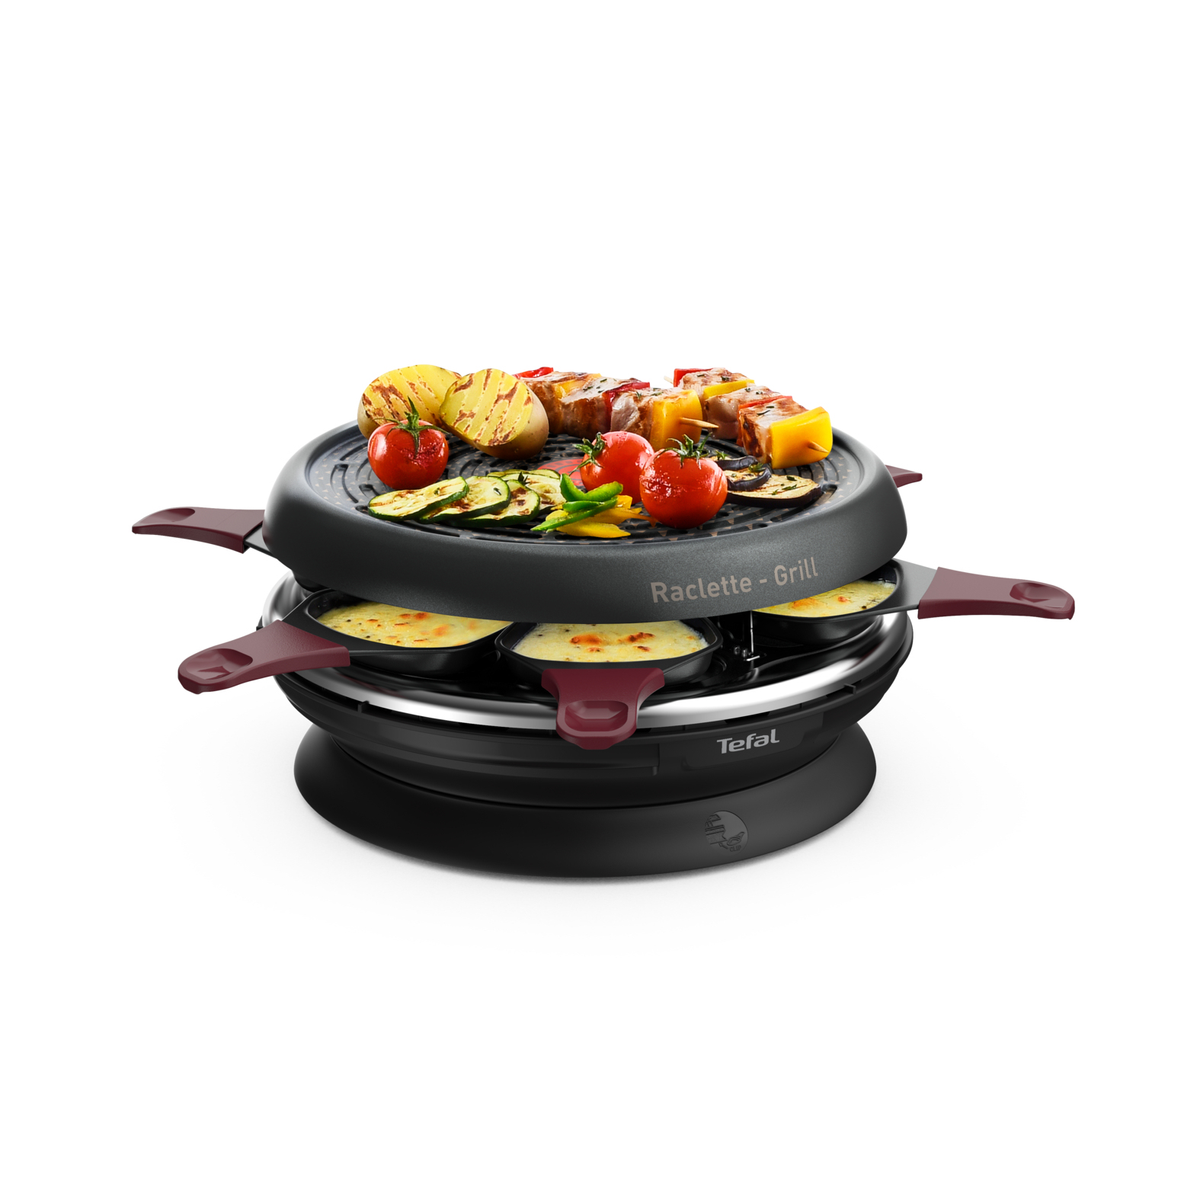 NEO INVENT Raclette RACLETTE-GRILL RE 1820 TEFAL